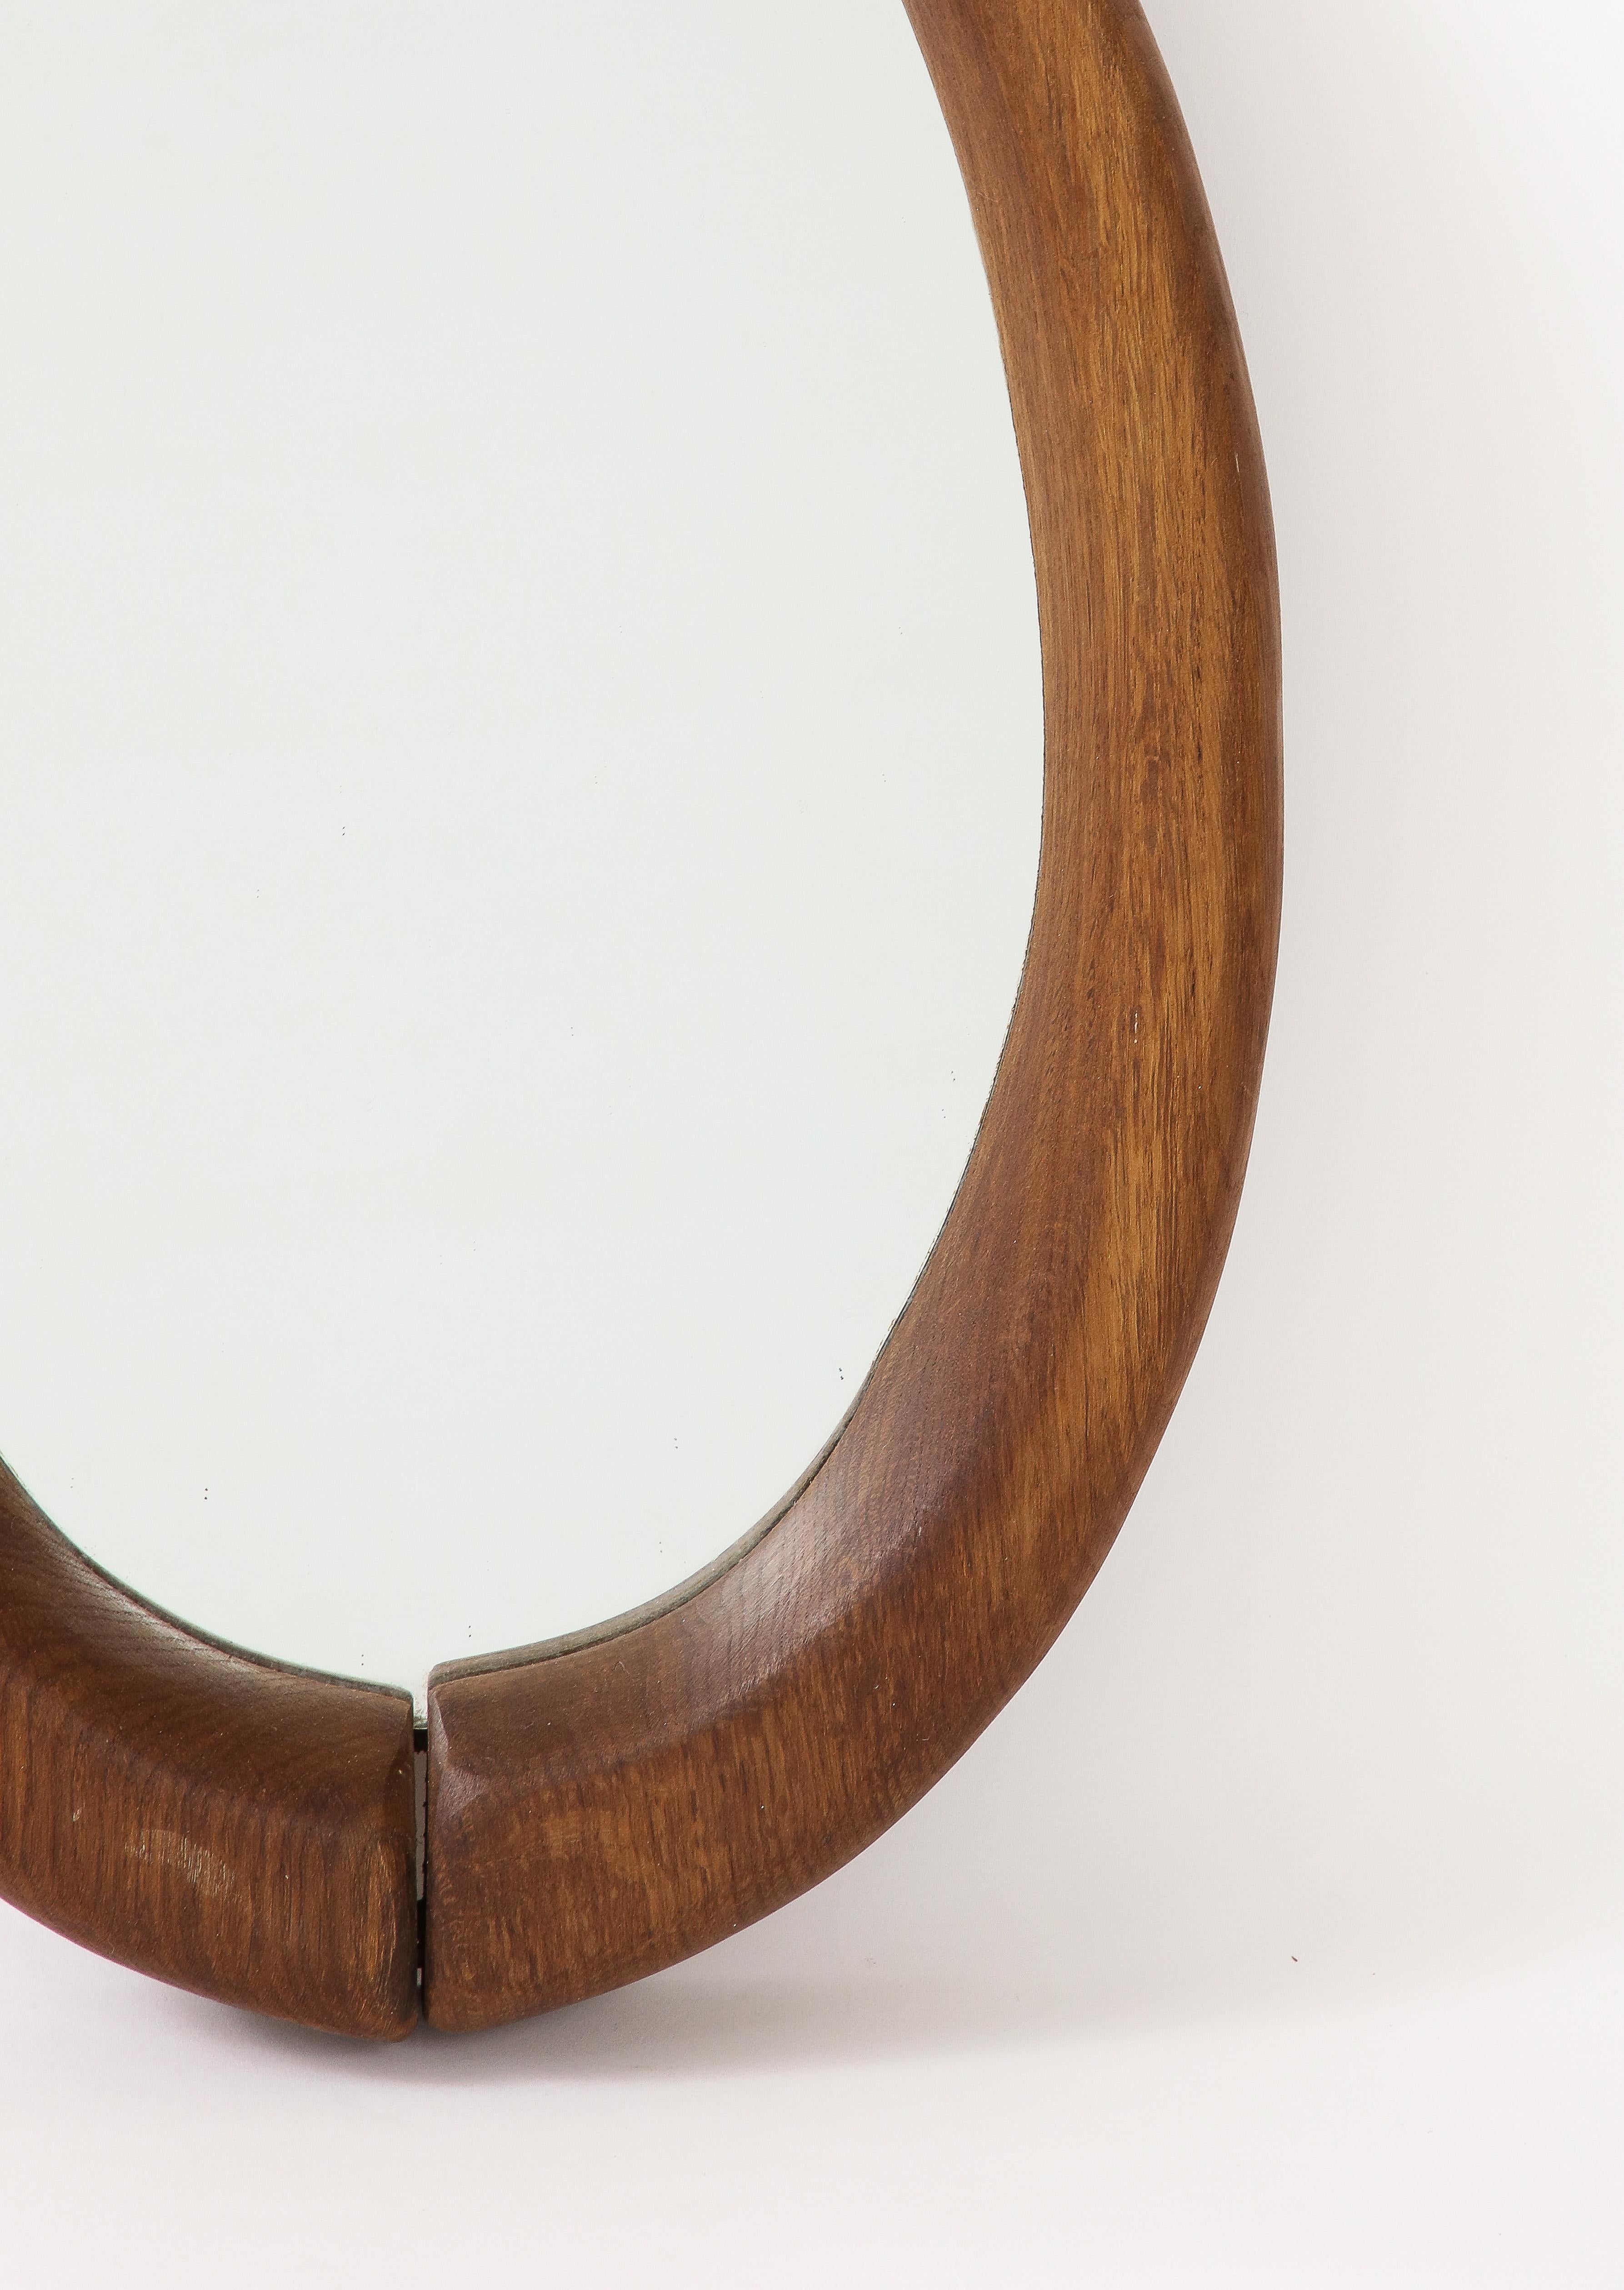 Brutalist Solid Wood Wall Mirror, France, 1960's For Sale 1